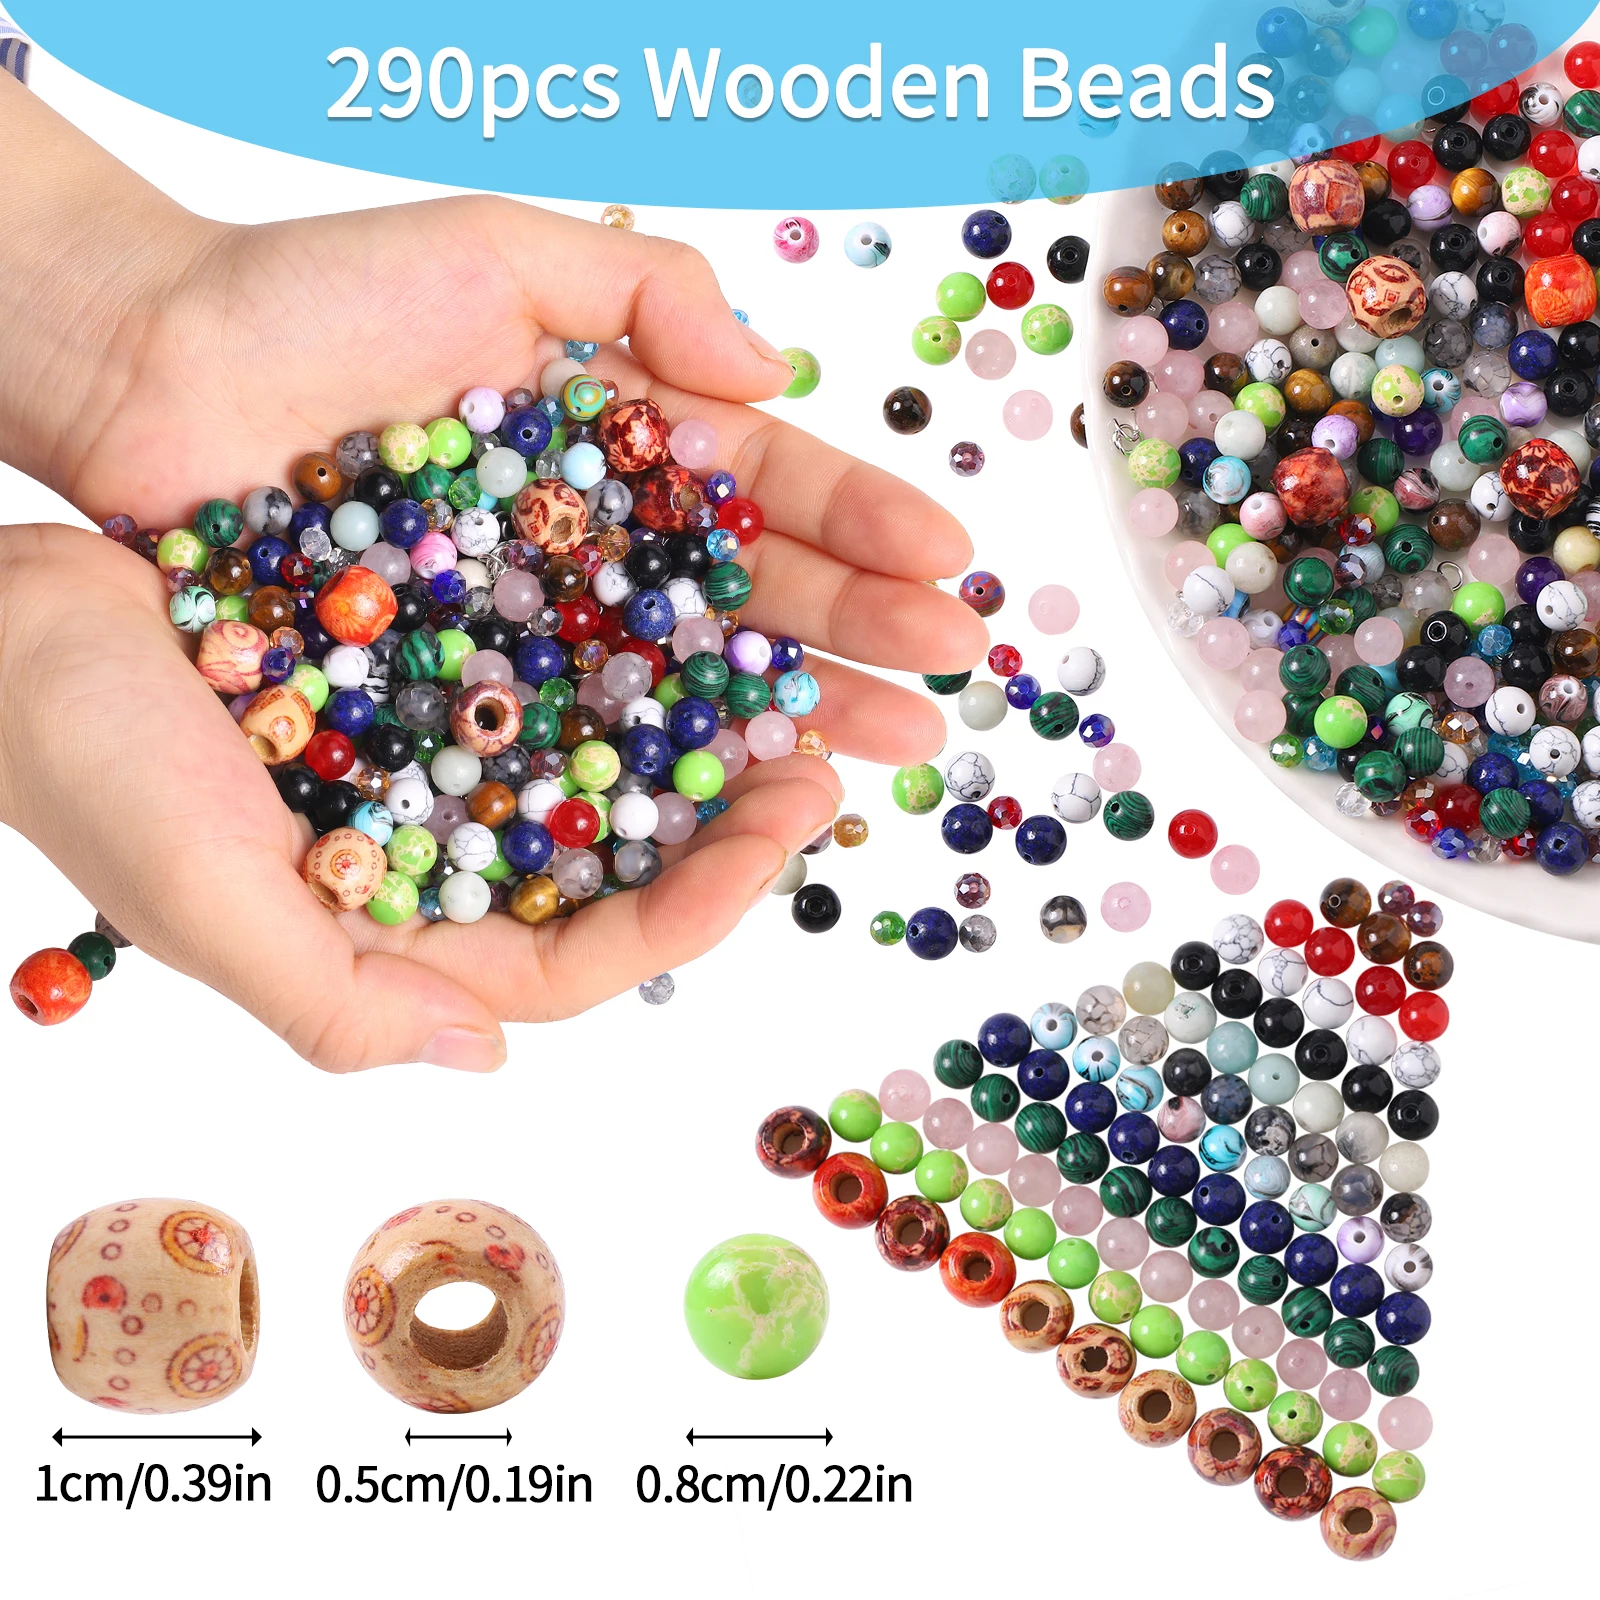 290pcs Wood Handmade DIY Mixed Alphabet Letter Beads send tools Charms Beads for Making Jewelry Handmade Bracelets Accessories 61pcs burning pen tips soldering iron pyrography tools kit wood burning chiseled tips carving dies converting head accessories